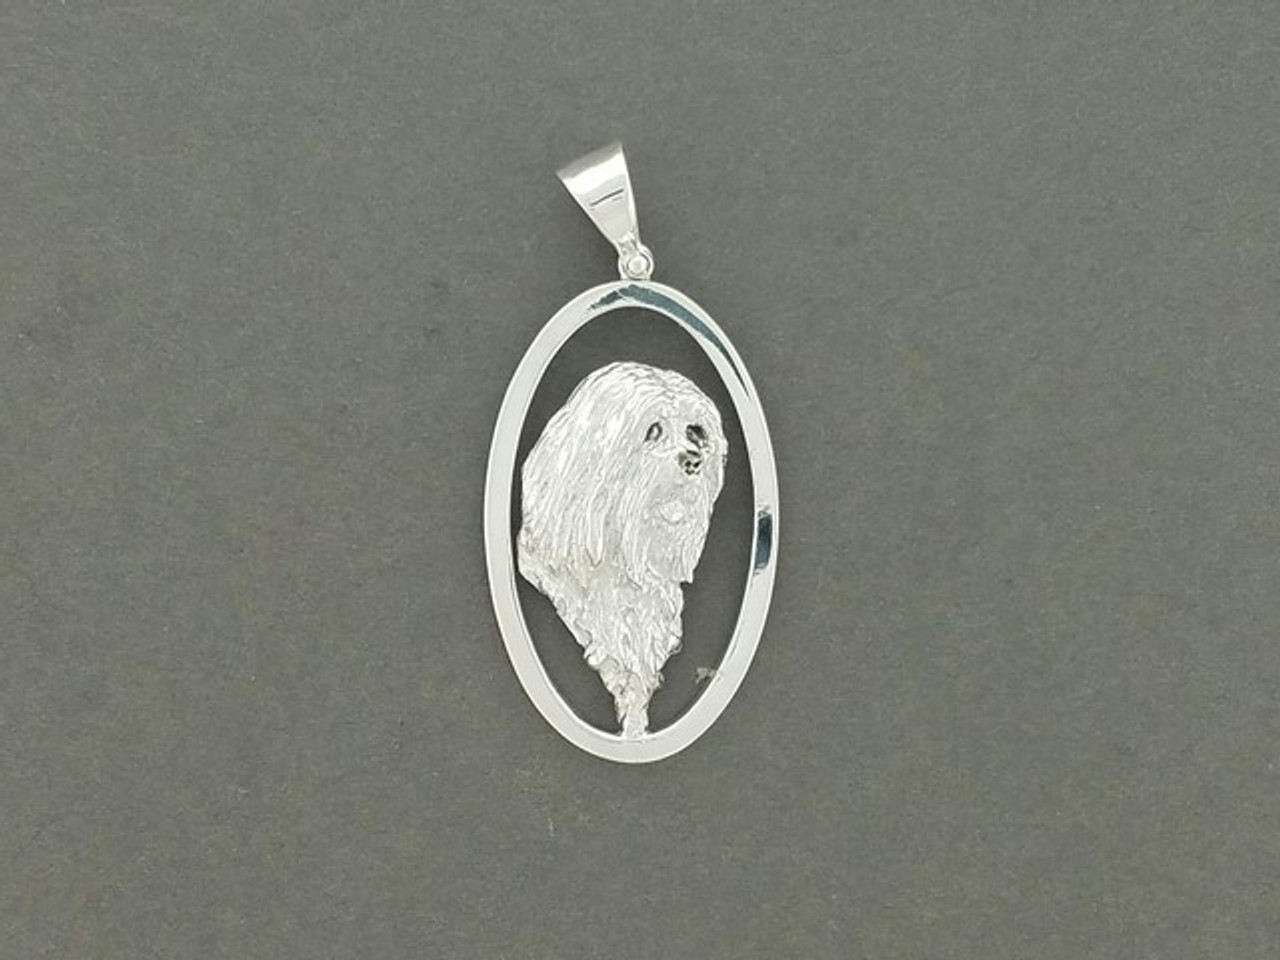 Frame Contemporary Oval With Tibetan Terrier Pendant